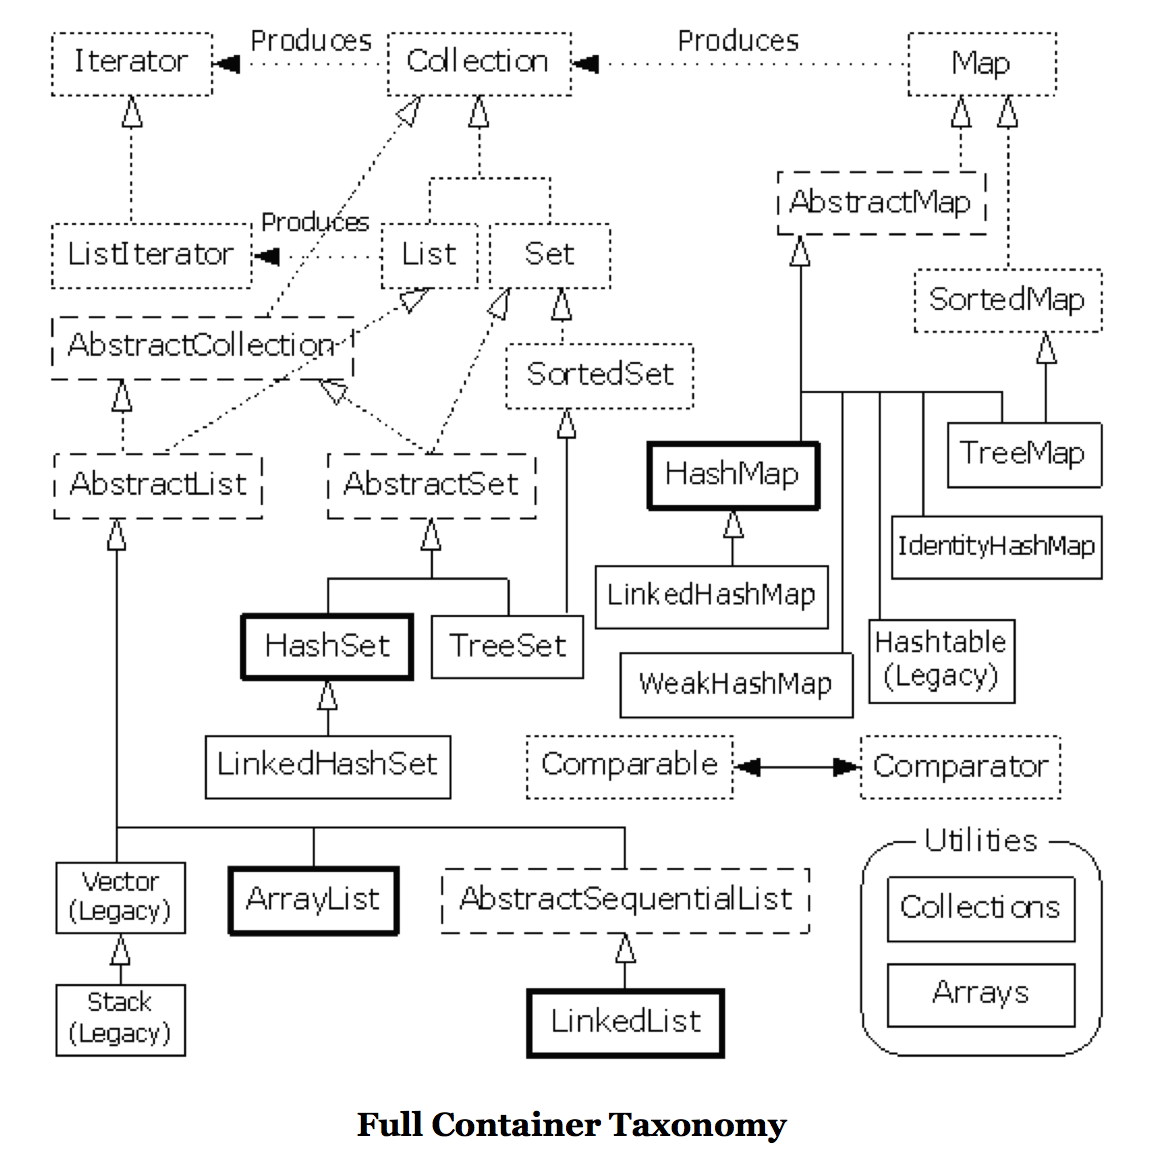 Full Container Taxonomy